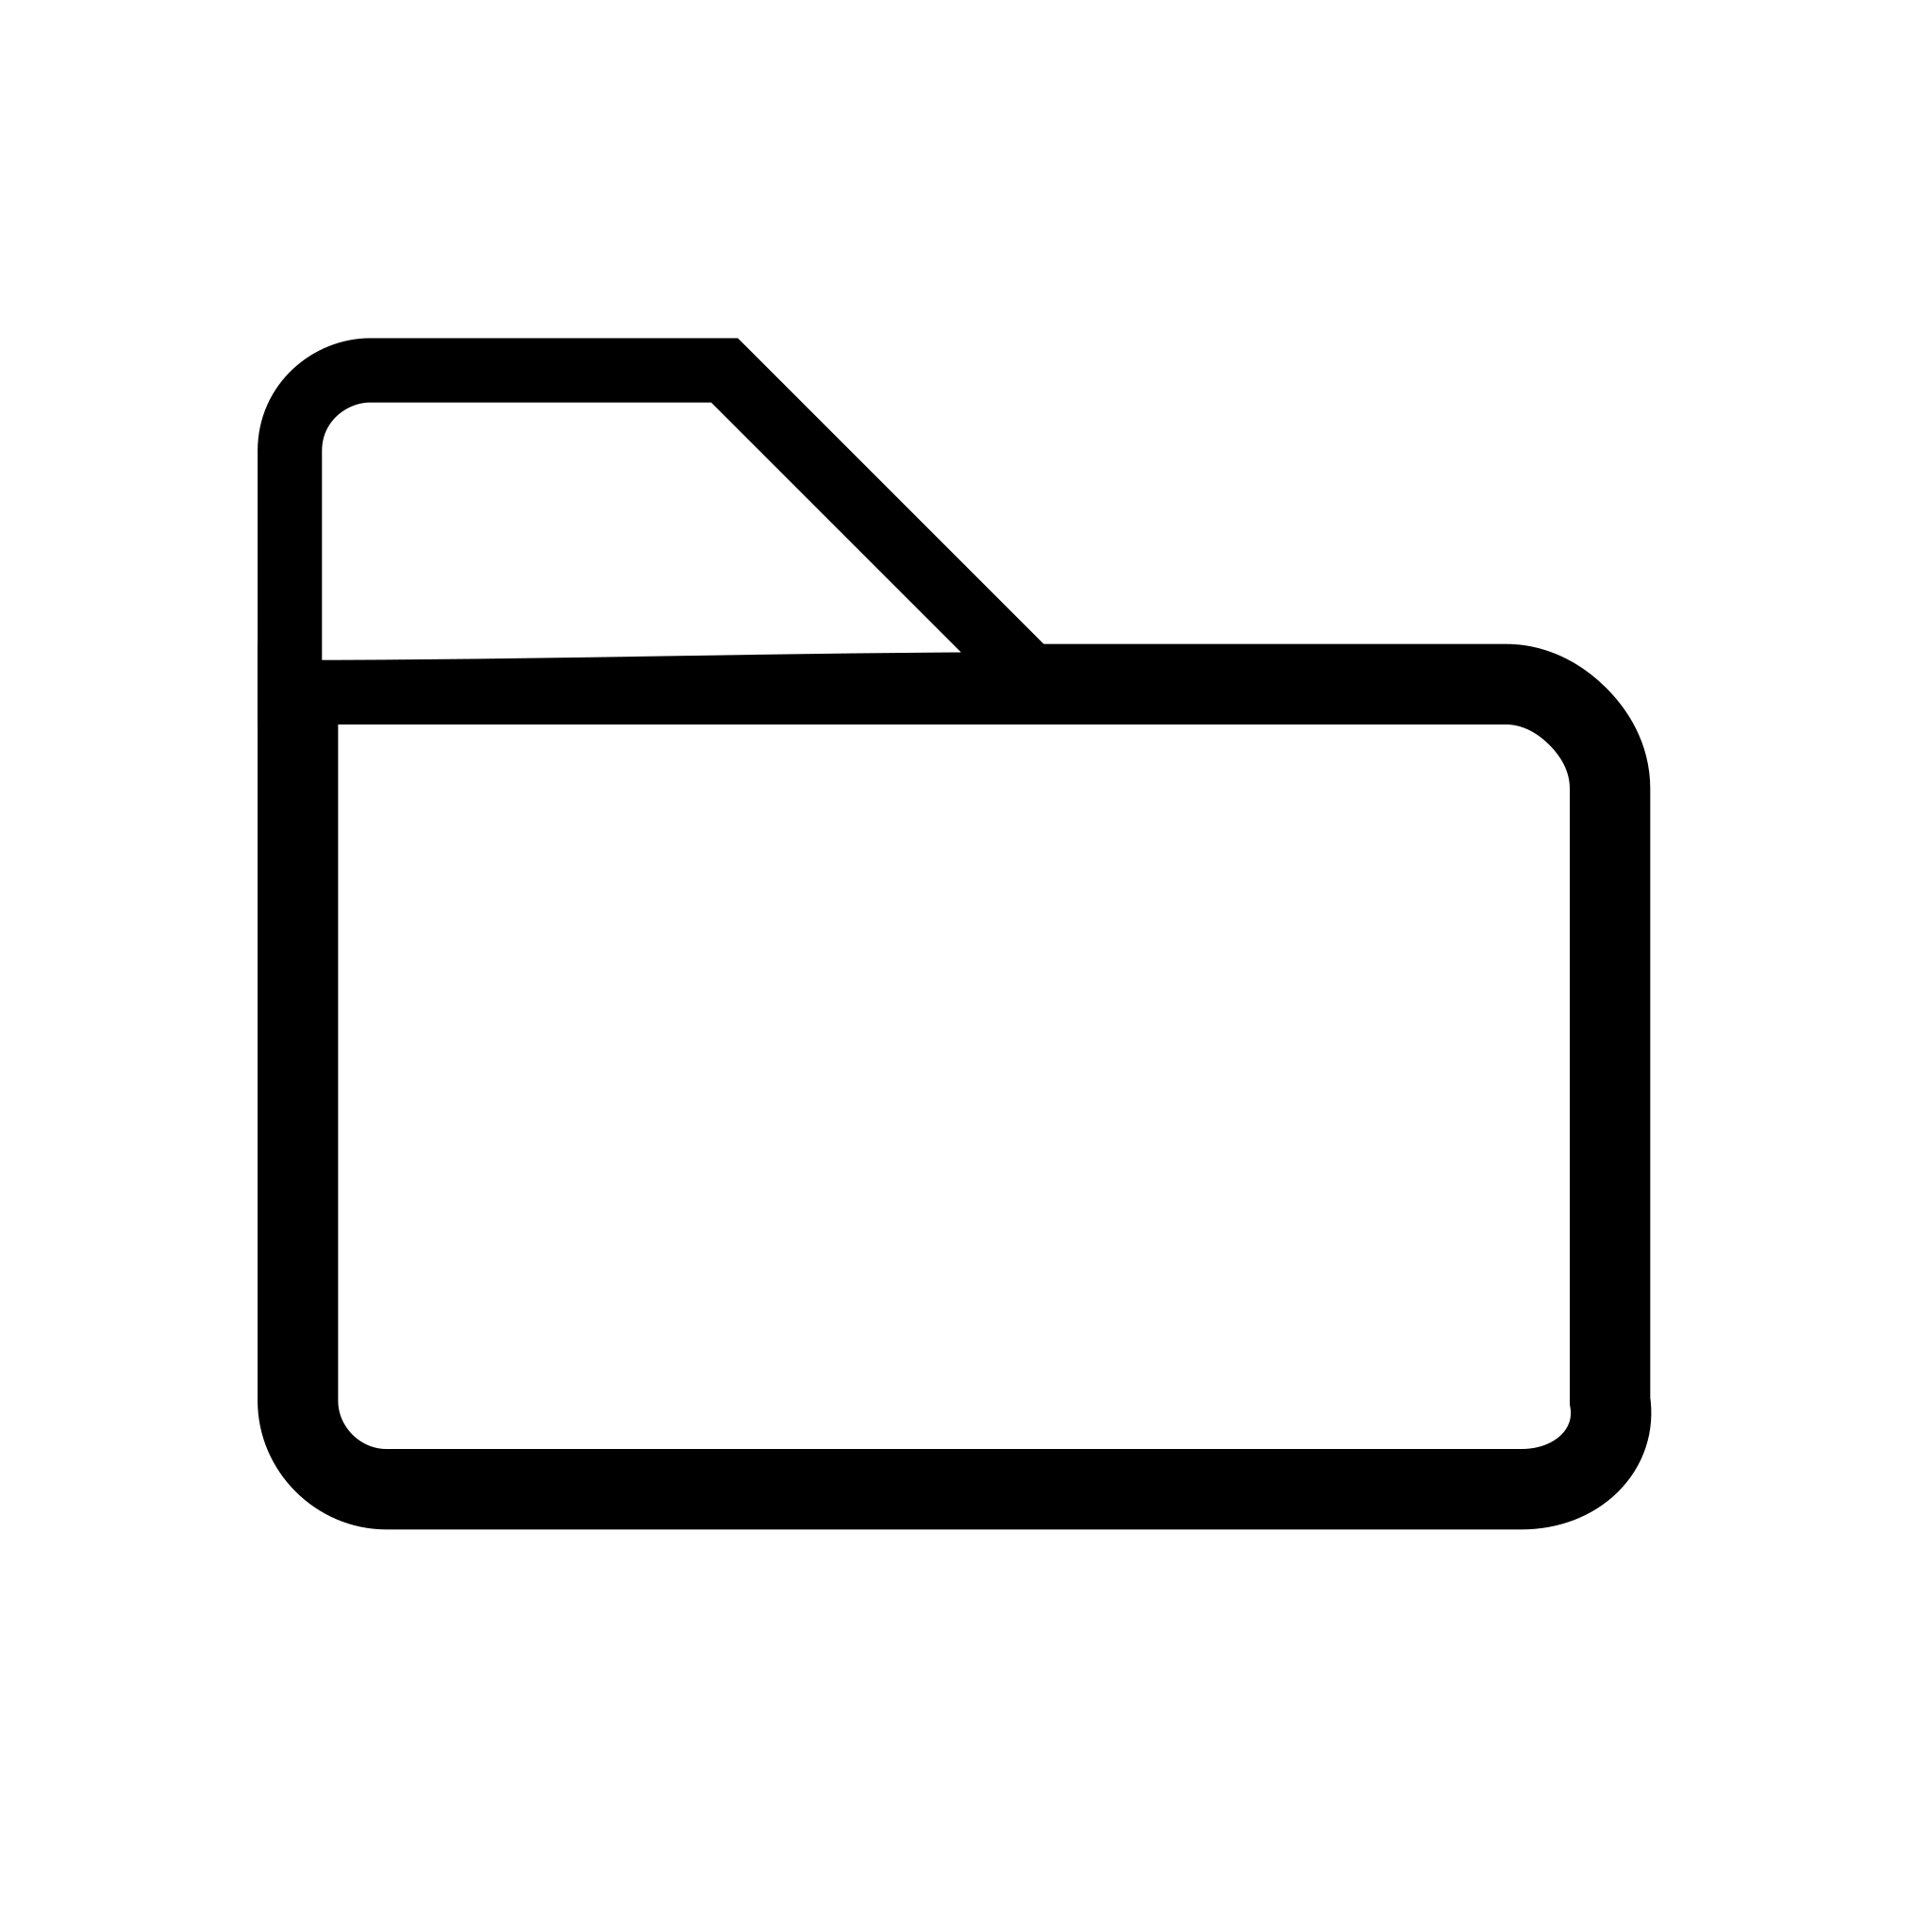 Folder with a document icon